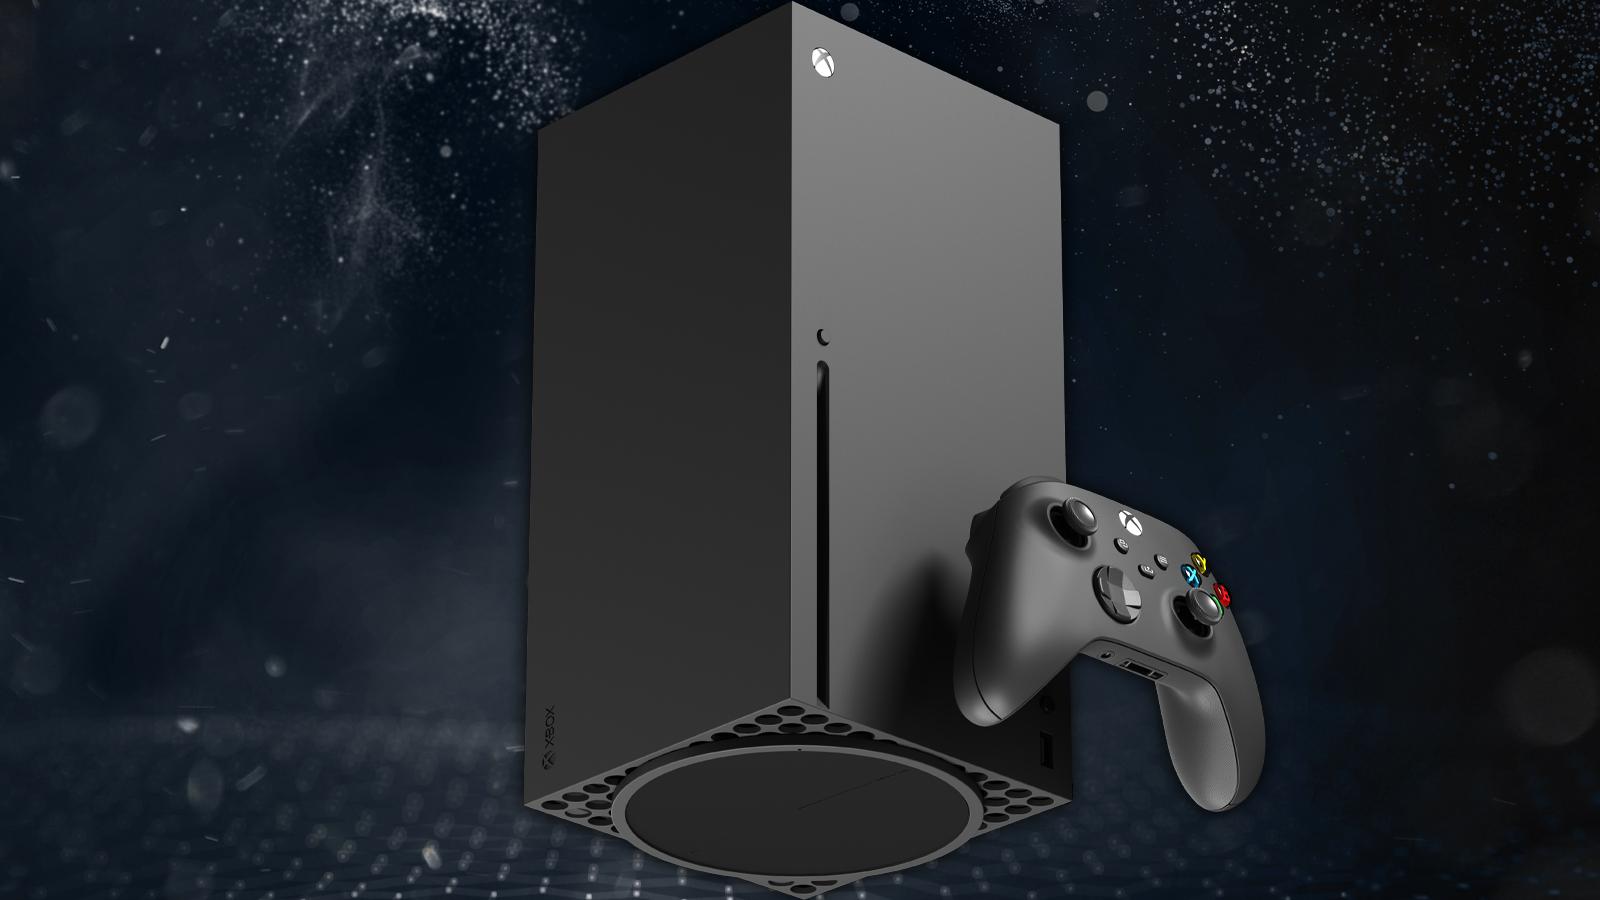 Xbox Series X gets price slashed by $100 in bargain holiday deal